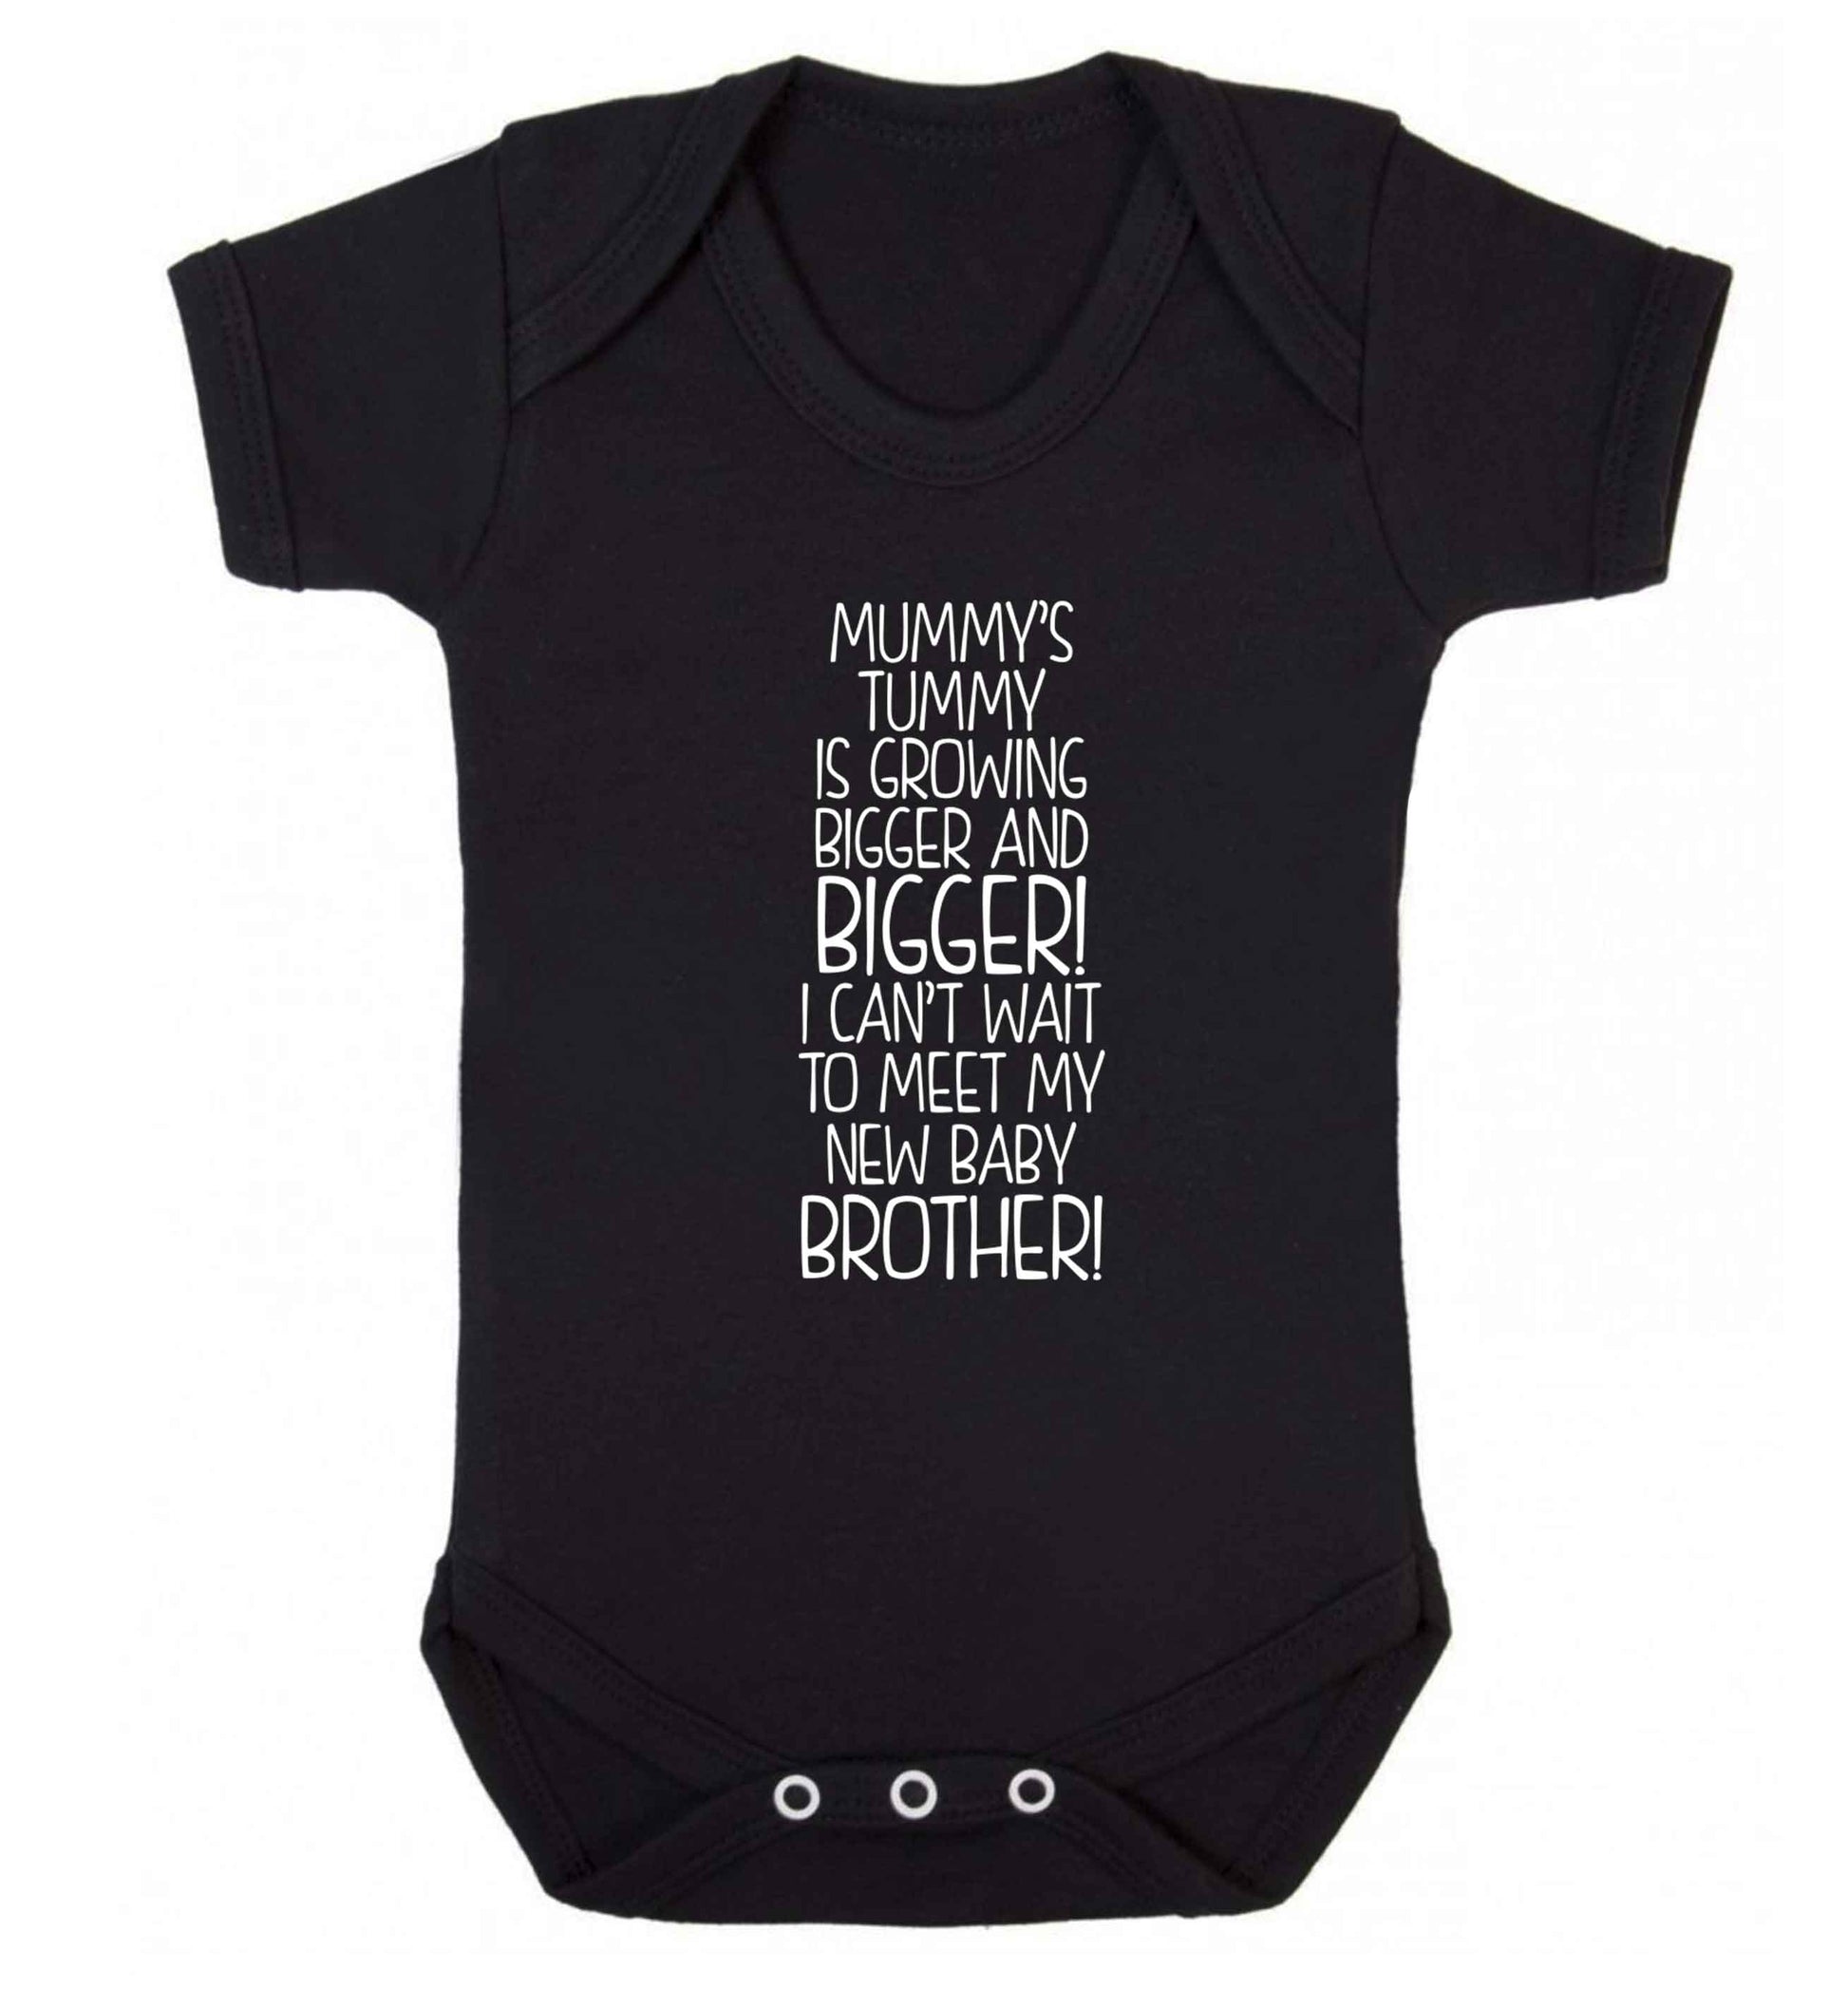 Mummy's tummy is growing bigger and bigger I can't wait to meet my new baby brother! Baby Vest black 18-24 months